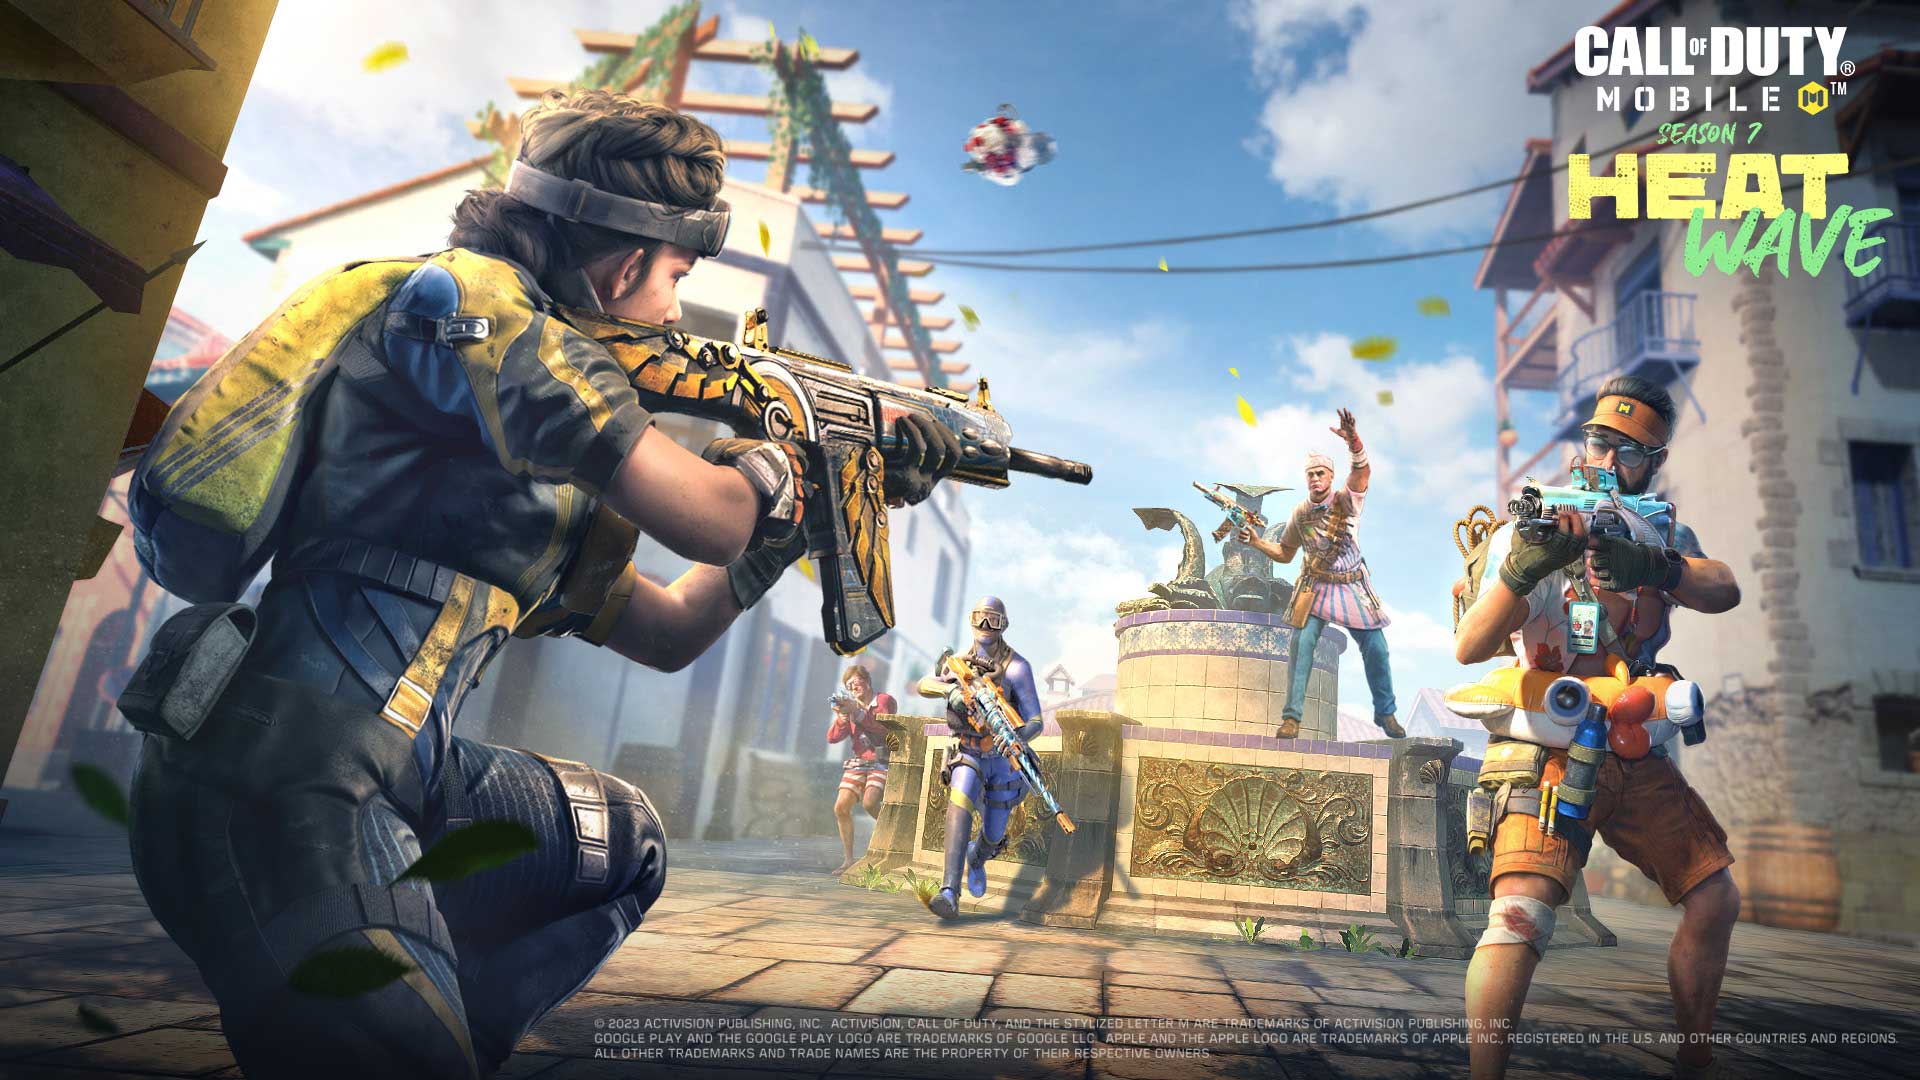 Players in Call of Duty Mobile aiming at each others in season 7 key art.